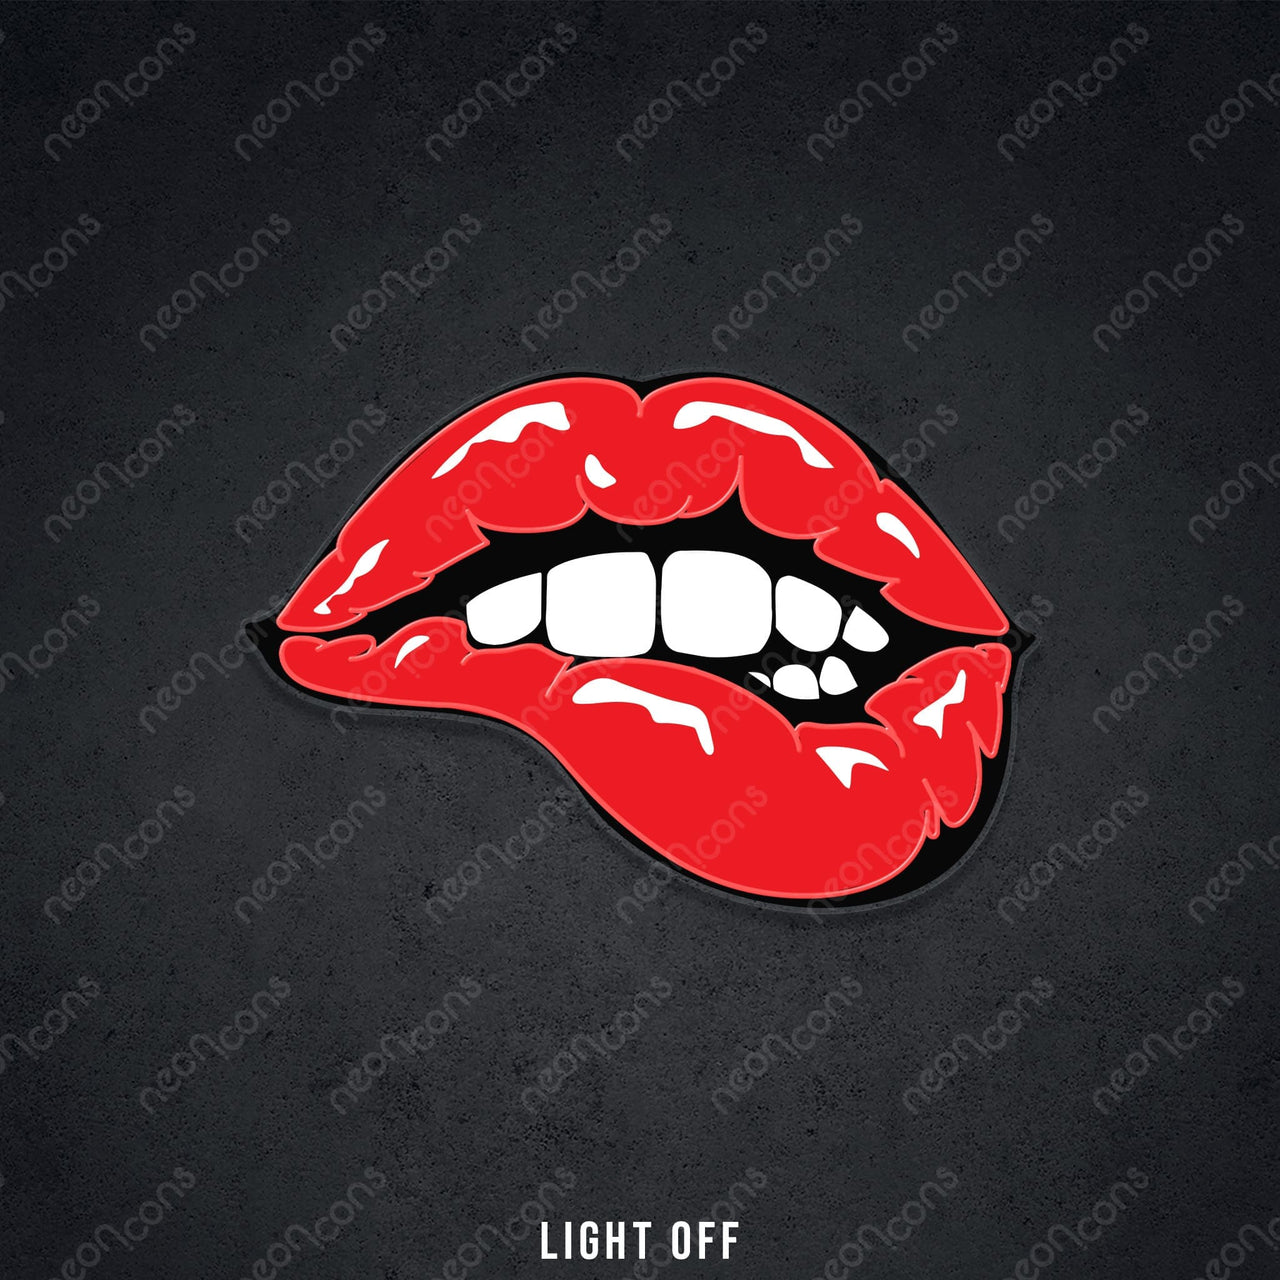 "Taste of Your Lips" LED Neon x Acrylic Artwork by Neon Icons